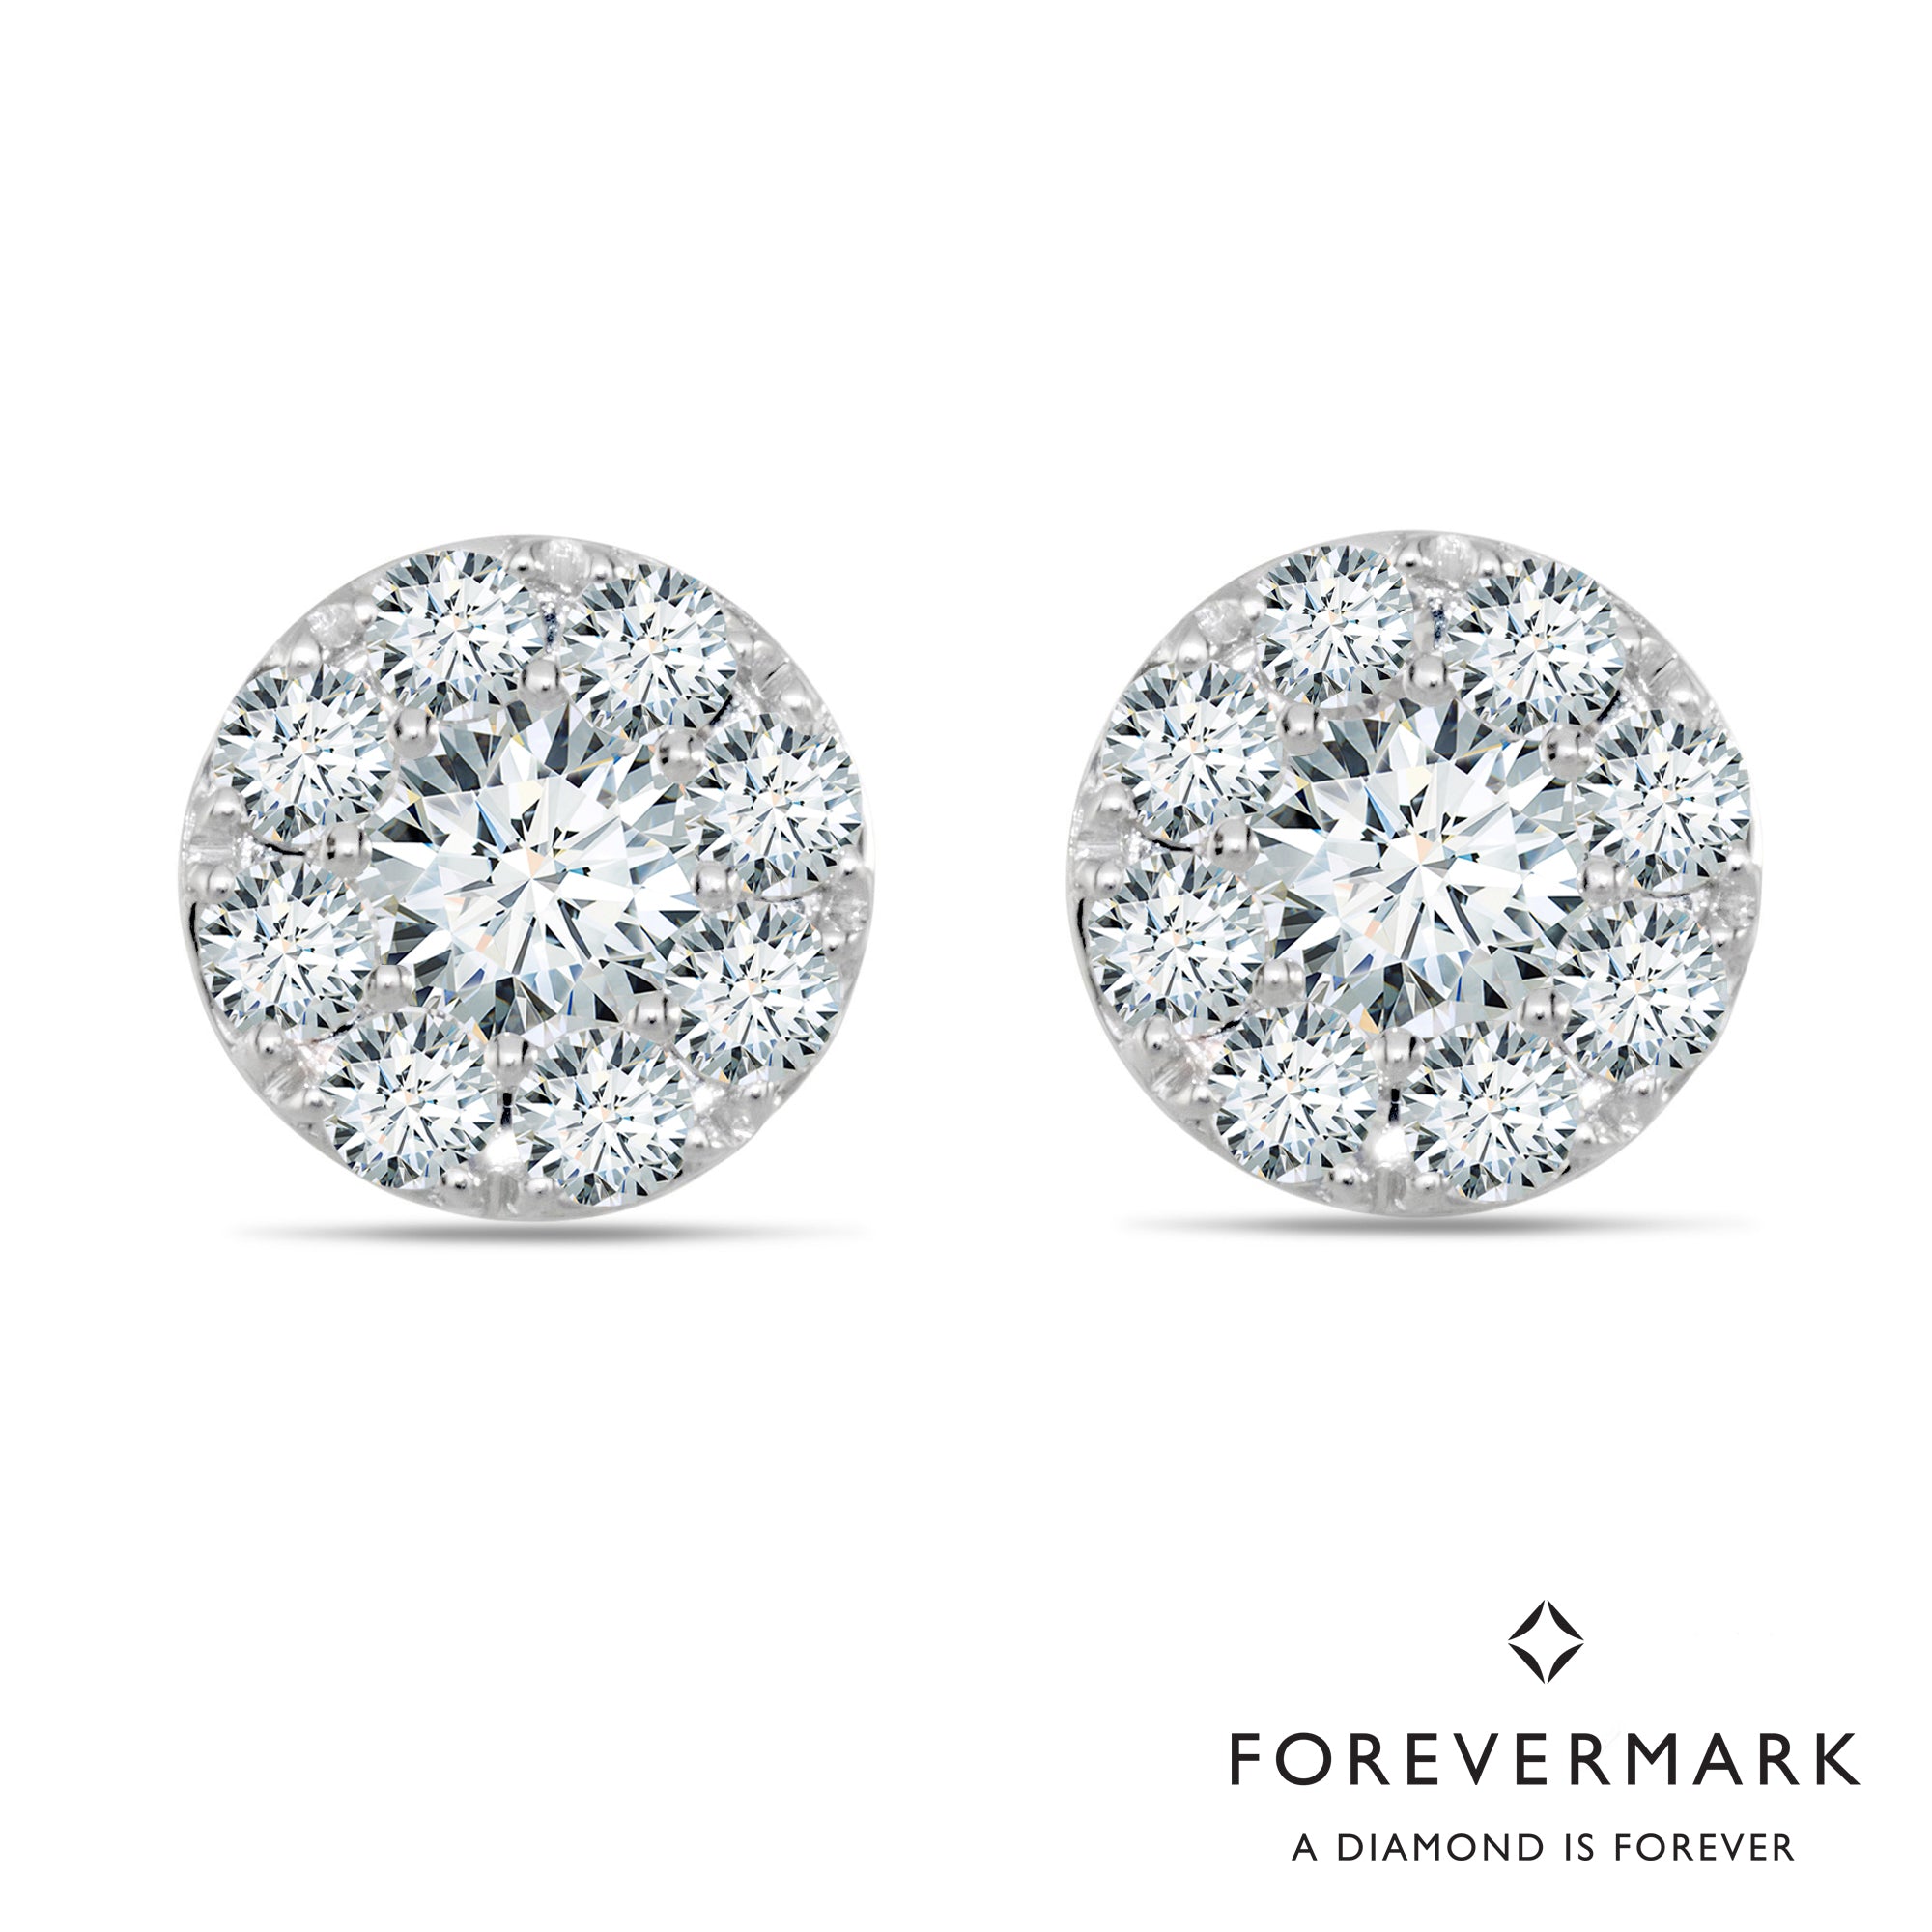 De Beers Forevermark Center of My Universe Diamond Halo Earrings in 18kt White Gold (1 1/3ct tw)